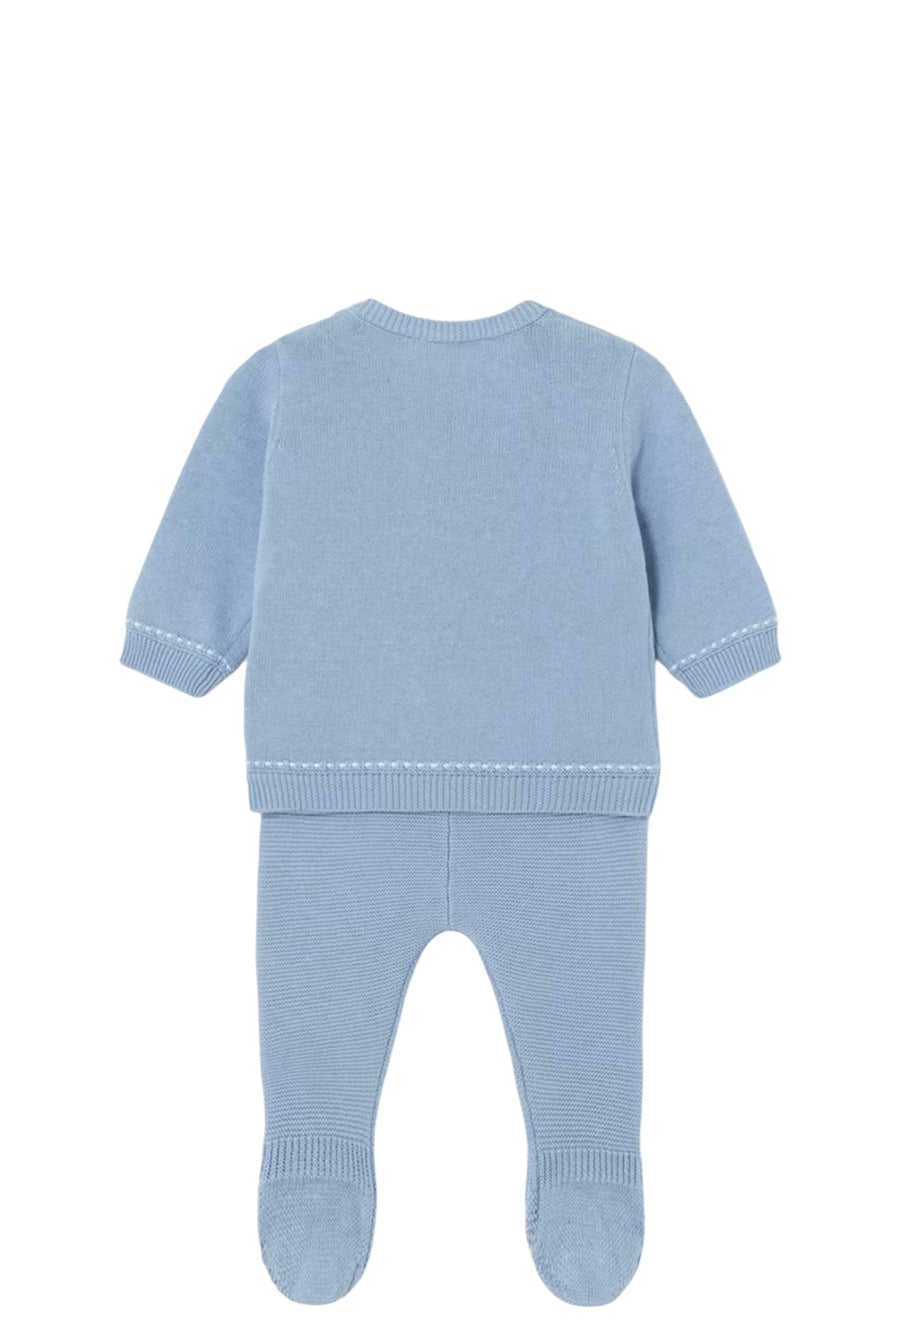 2 PIECE BABY BOY KNIT BLUE OUTFIT - Pink and Brown Boutique